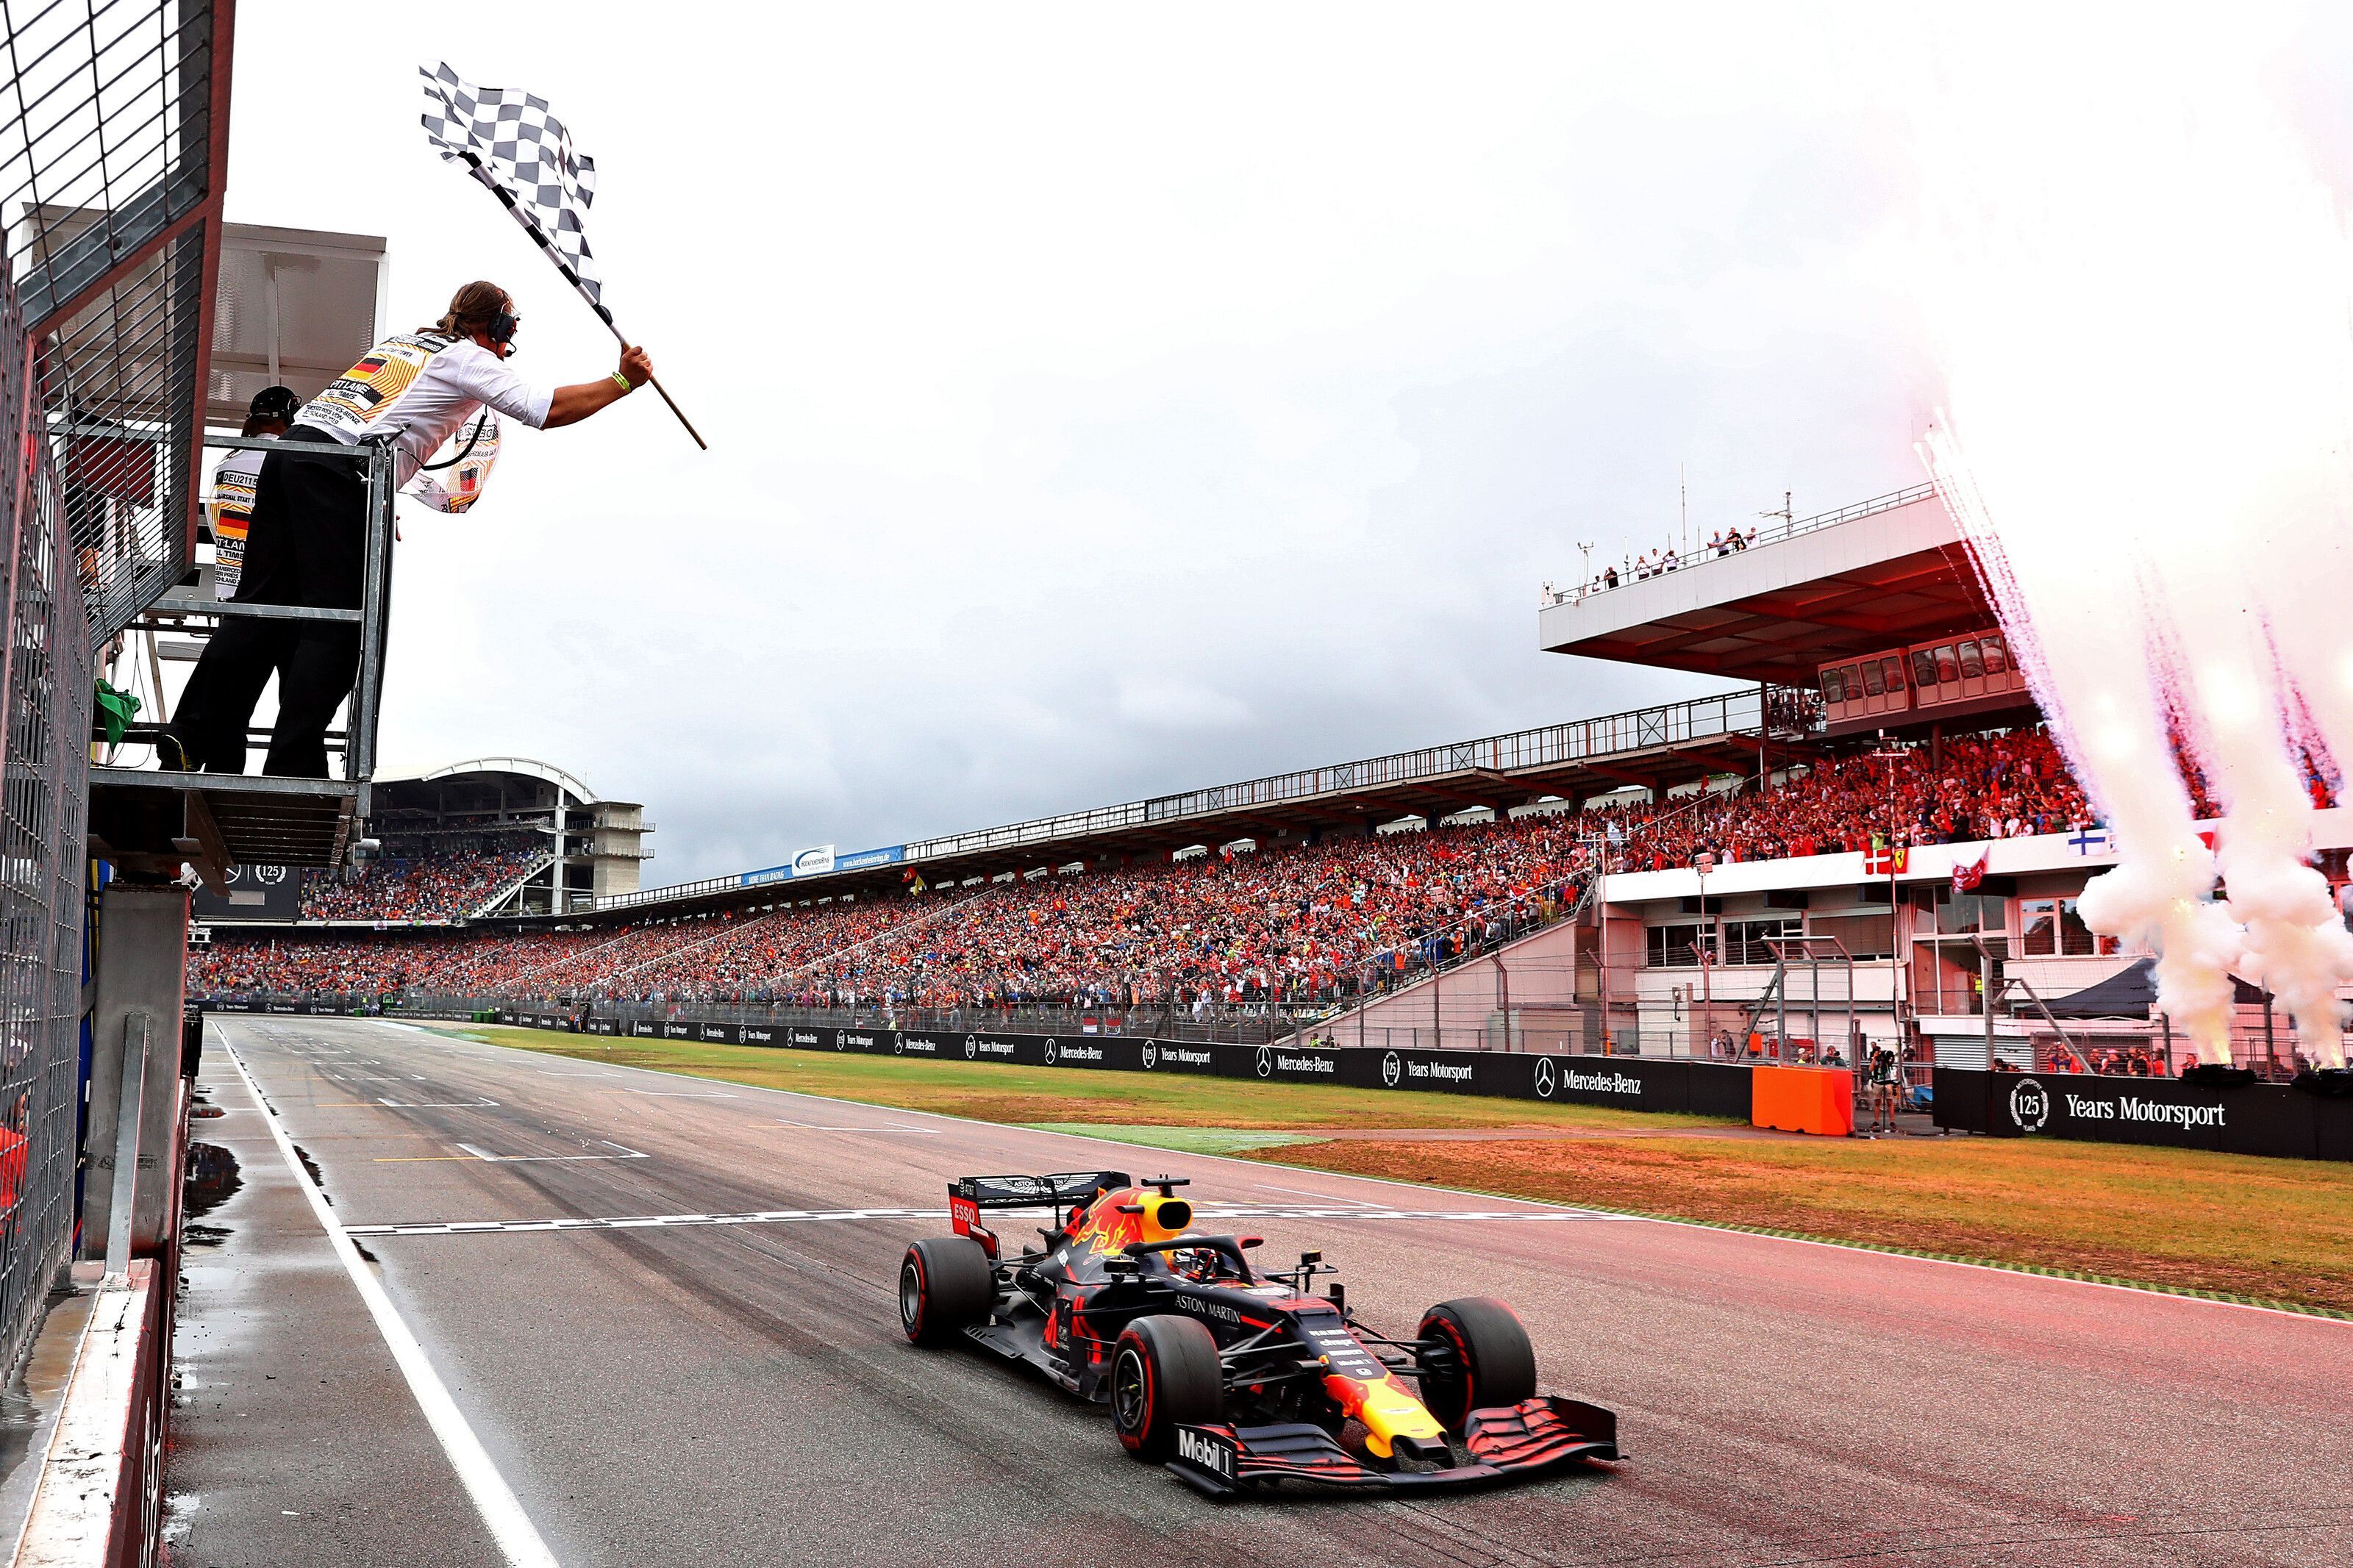 compiles 10 races of the decade, 2019 German GP voted best